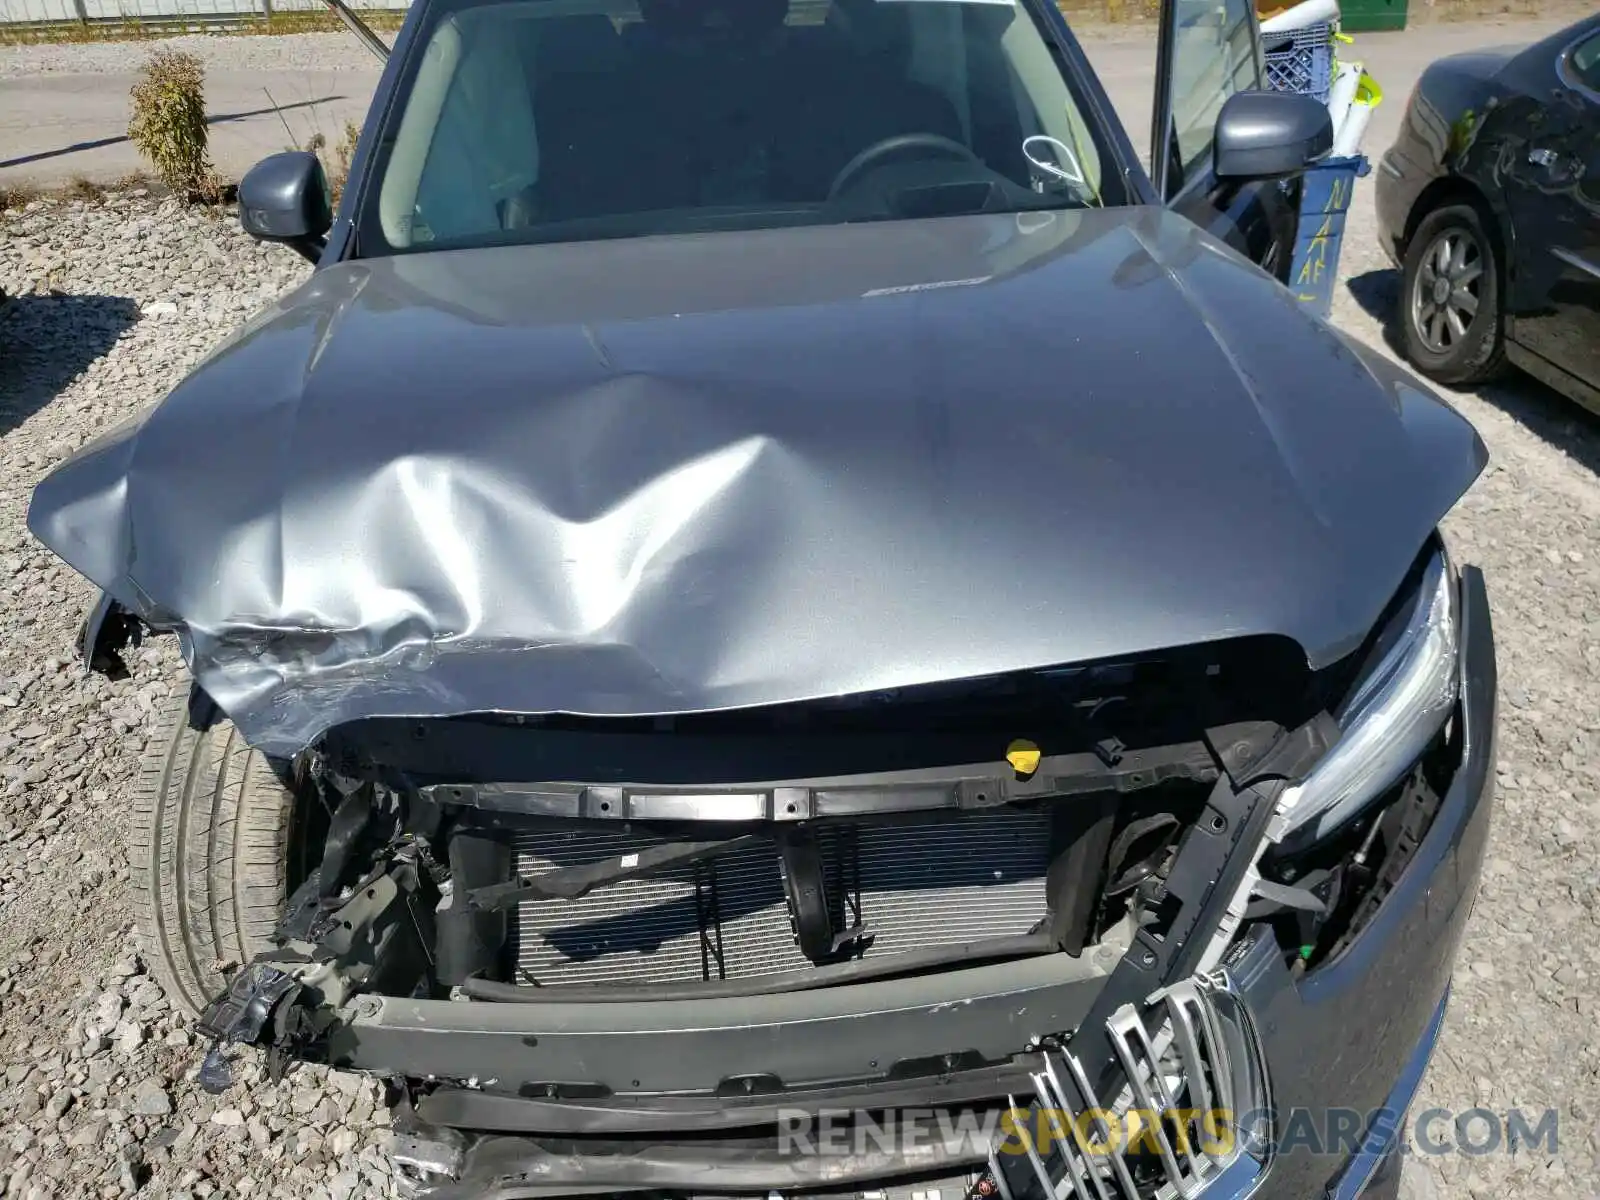 7 Photograph of a damaged car YV4A22PL3K1421893 VOLVO XC90 T6 IN 2019